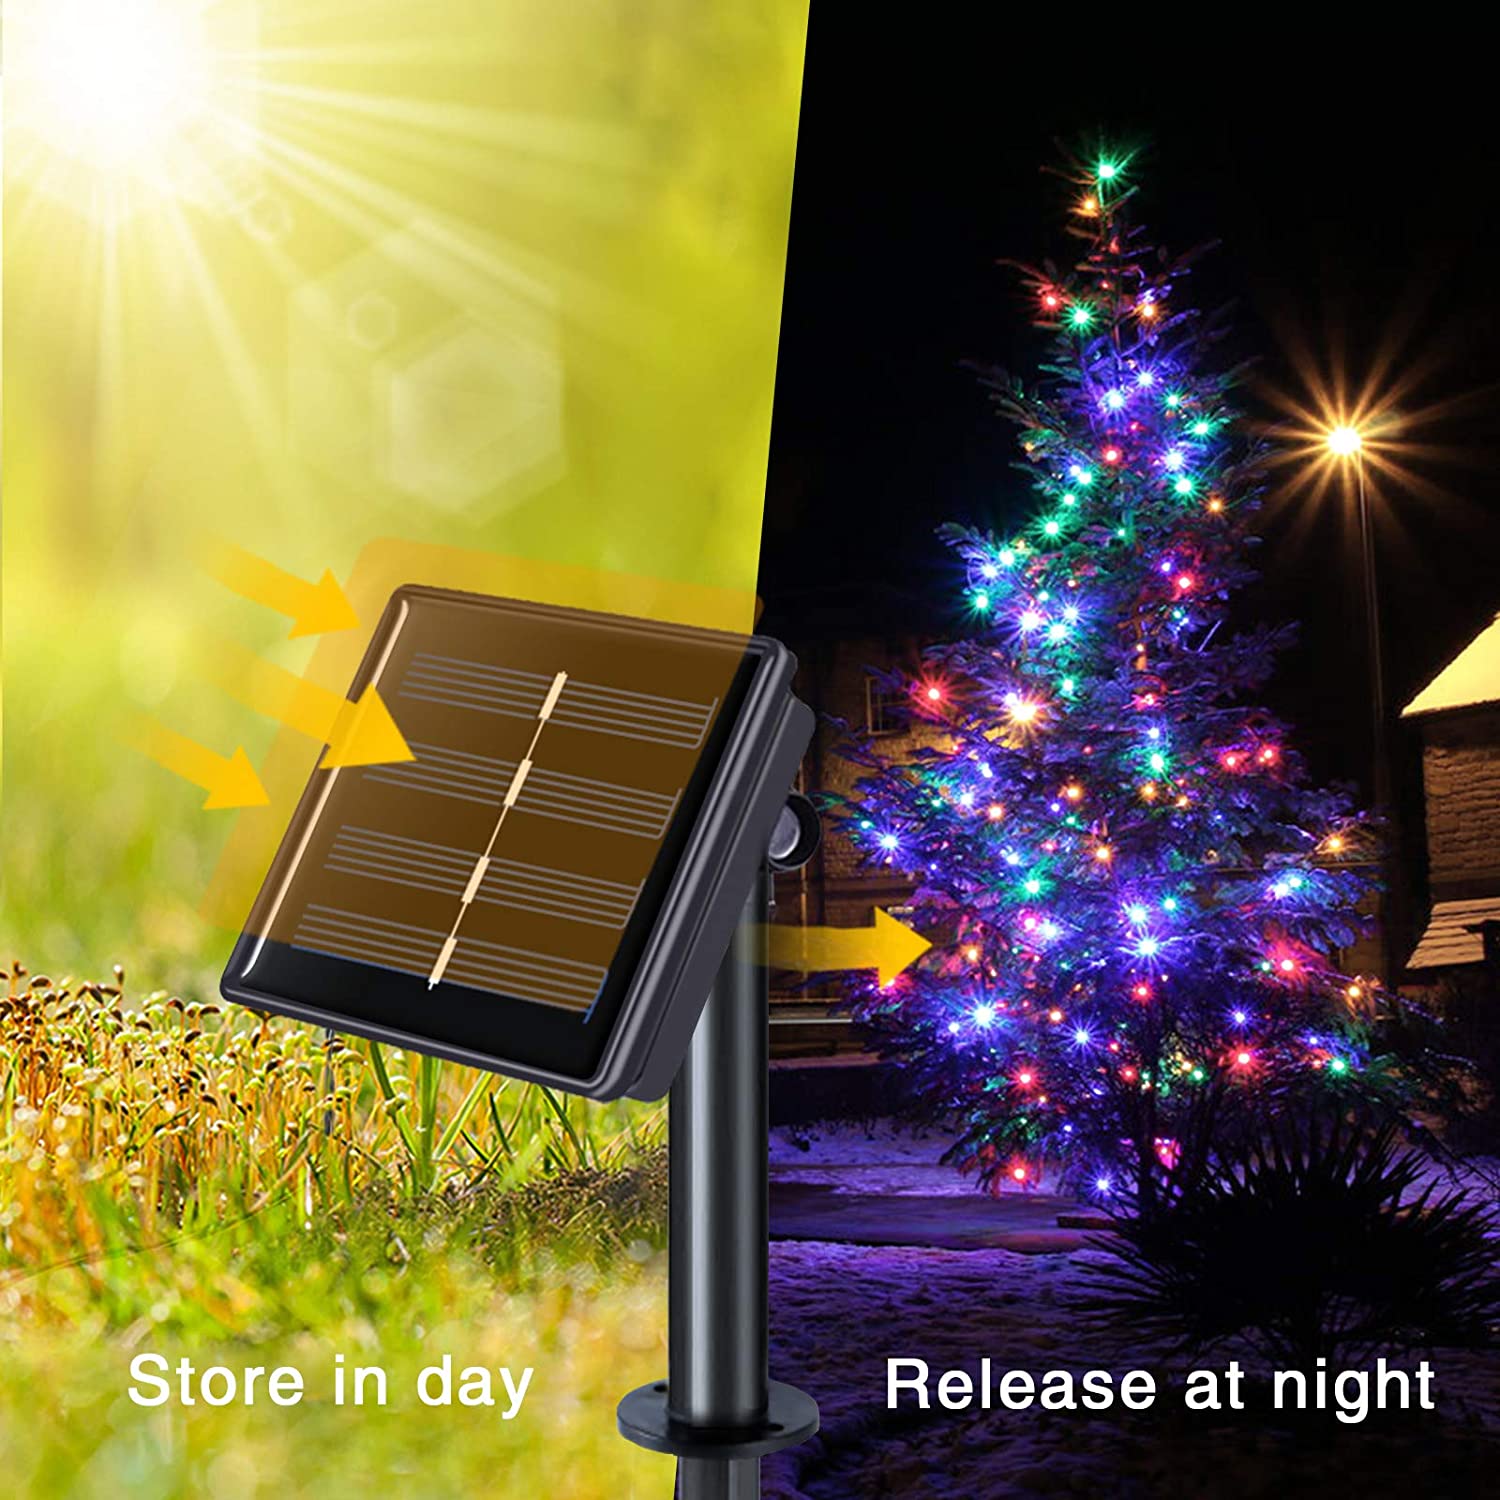 LED Solar String Lights Rope Light Strip Fairy Lights Outdoor Waterproof 8 Modes Garden Xmas Party Lam Decorative Lighting for Patio Garden Yard Party Wedding - image 2 of 9